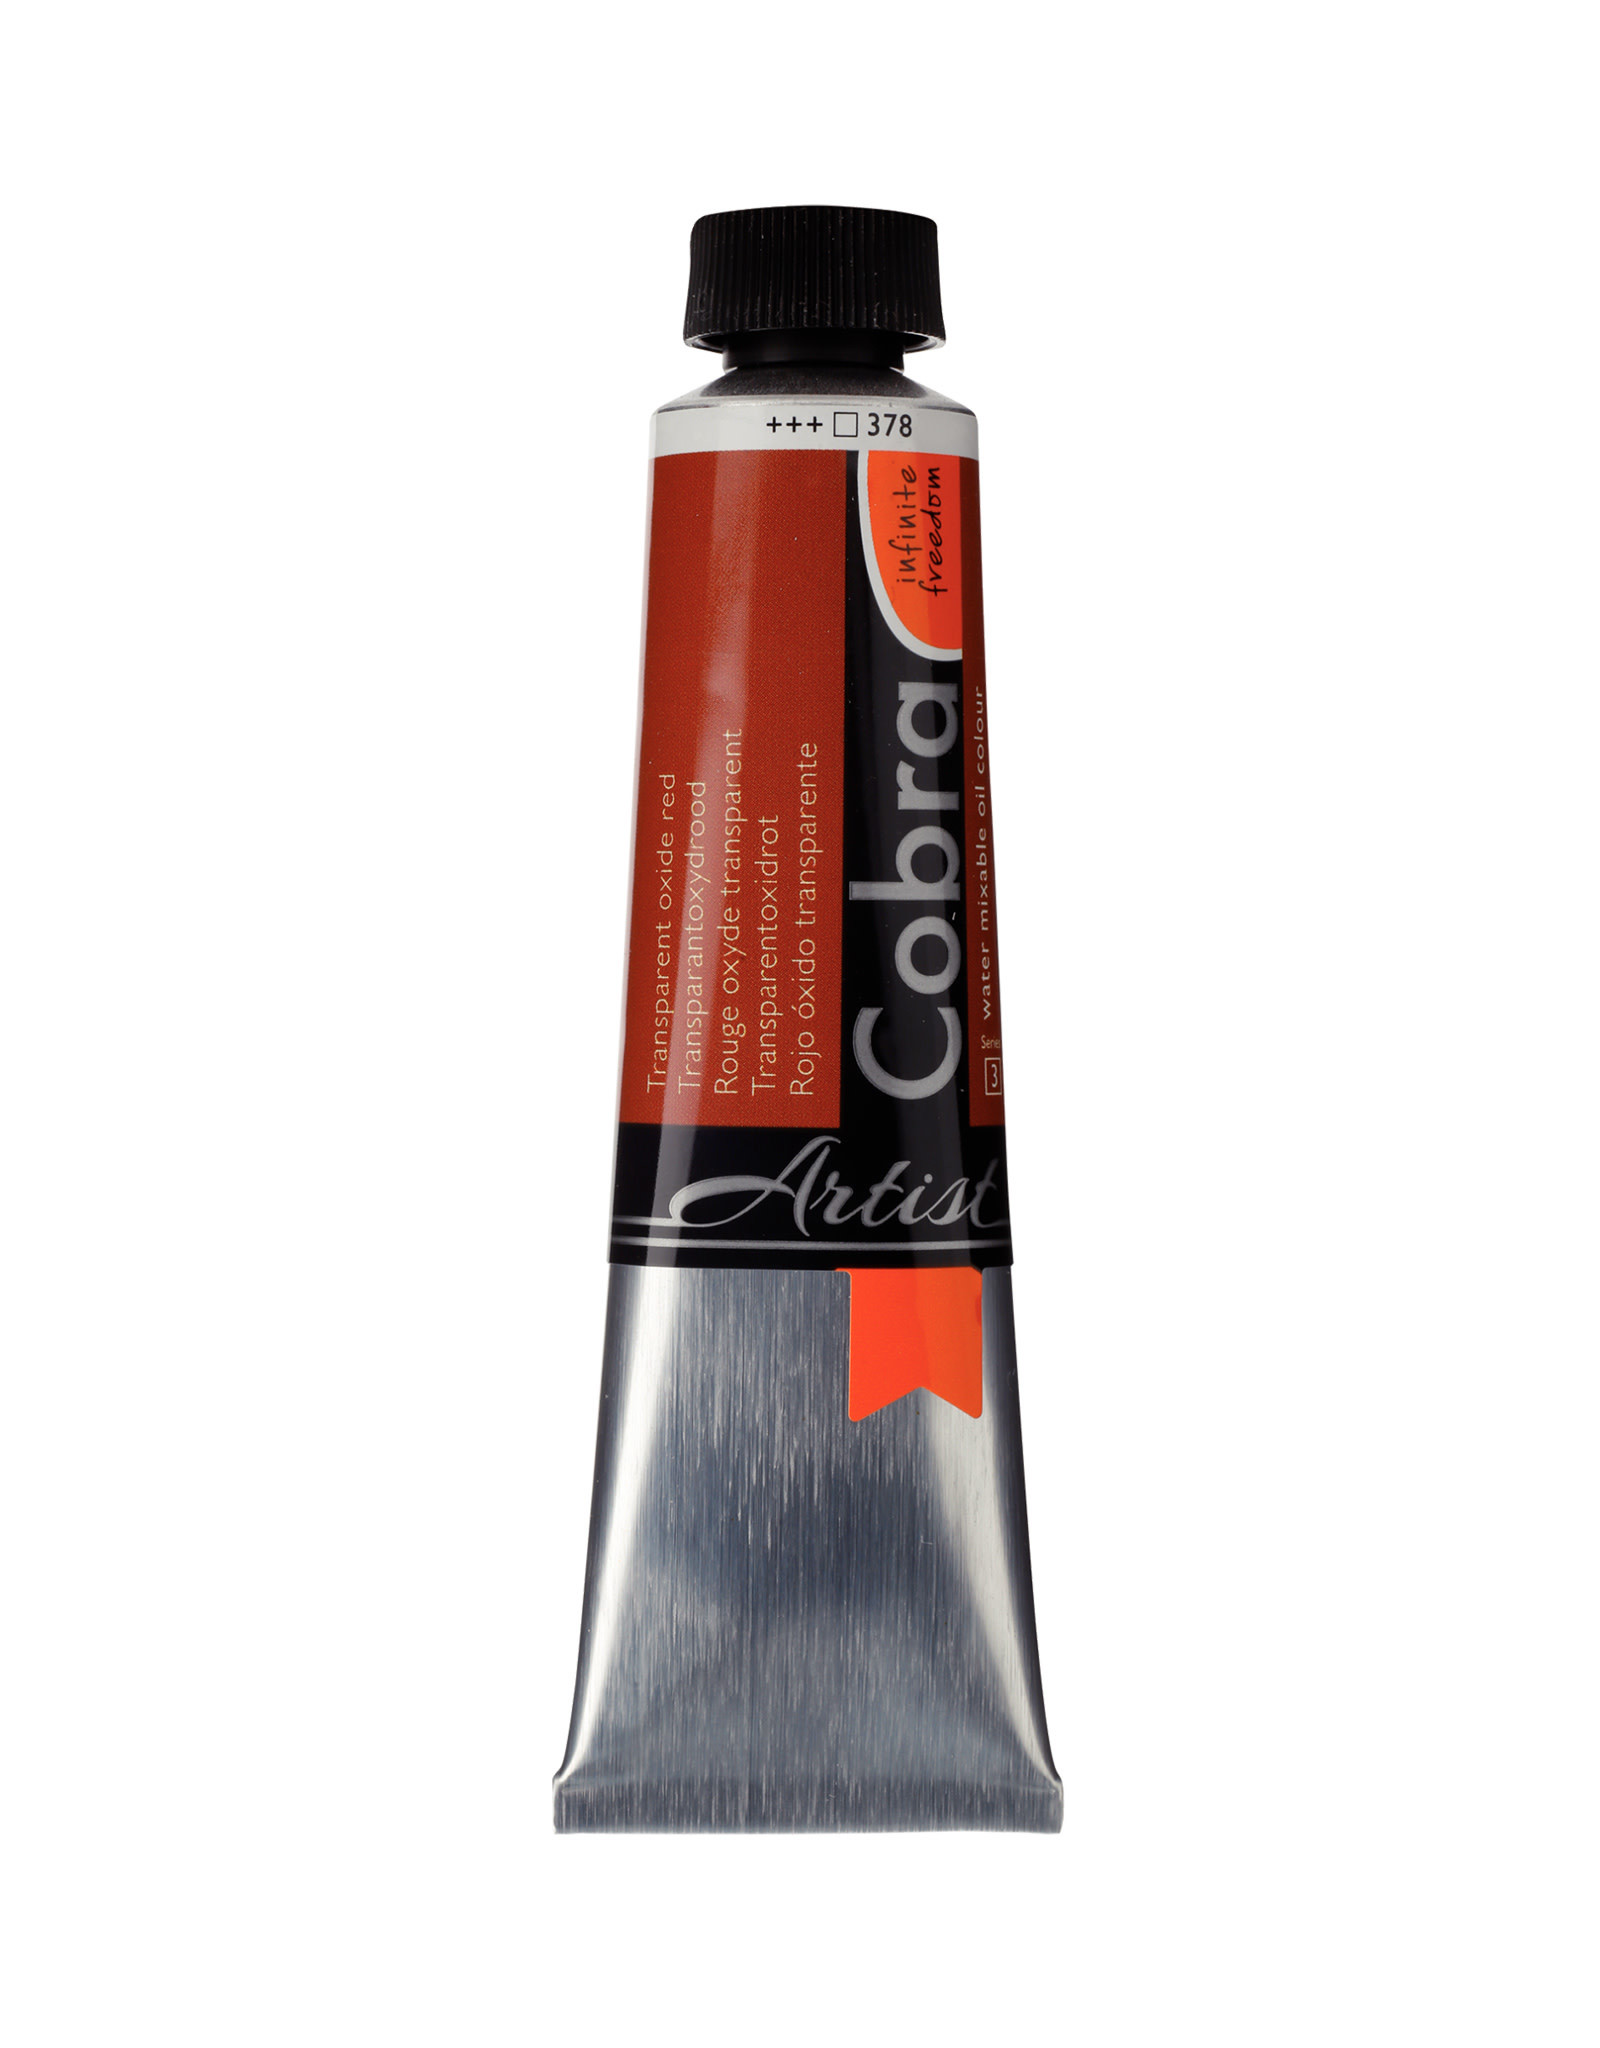 Royal Talens Cobra Water Mixable Artist Oils, Transparent Oxide Red 40ml